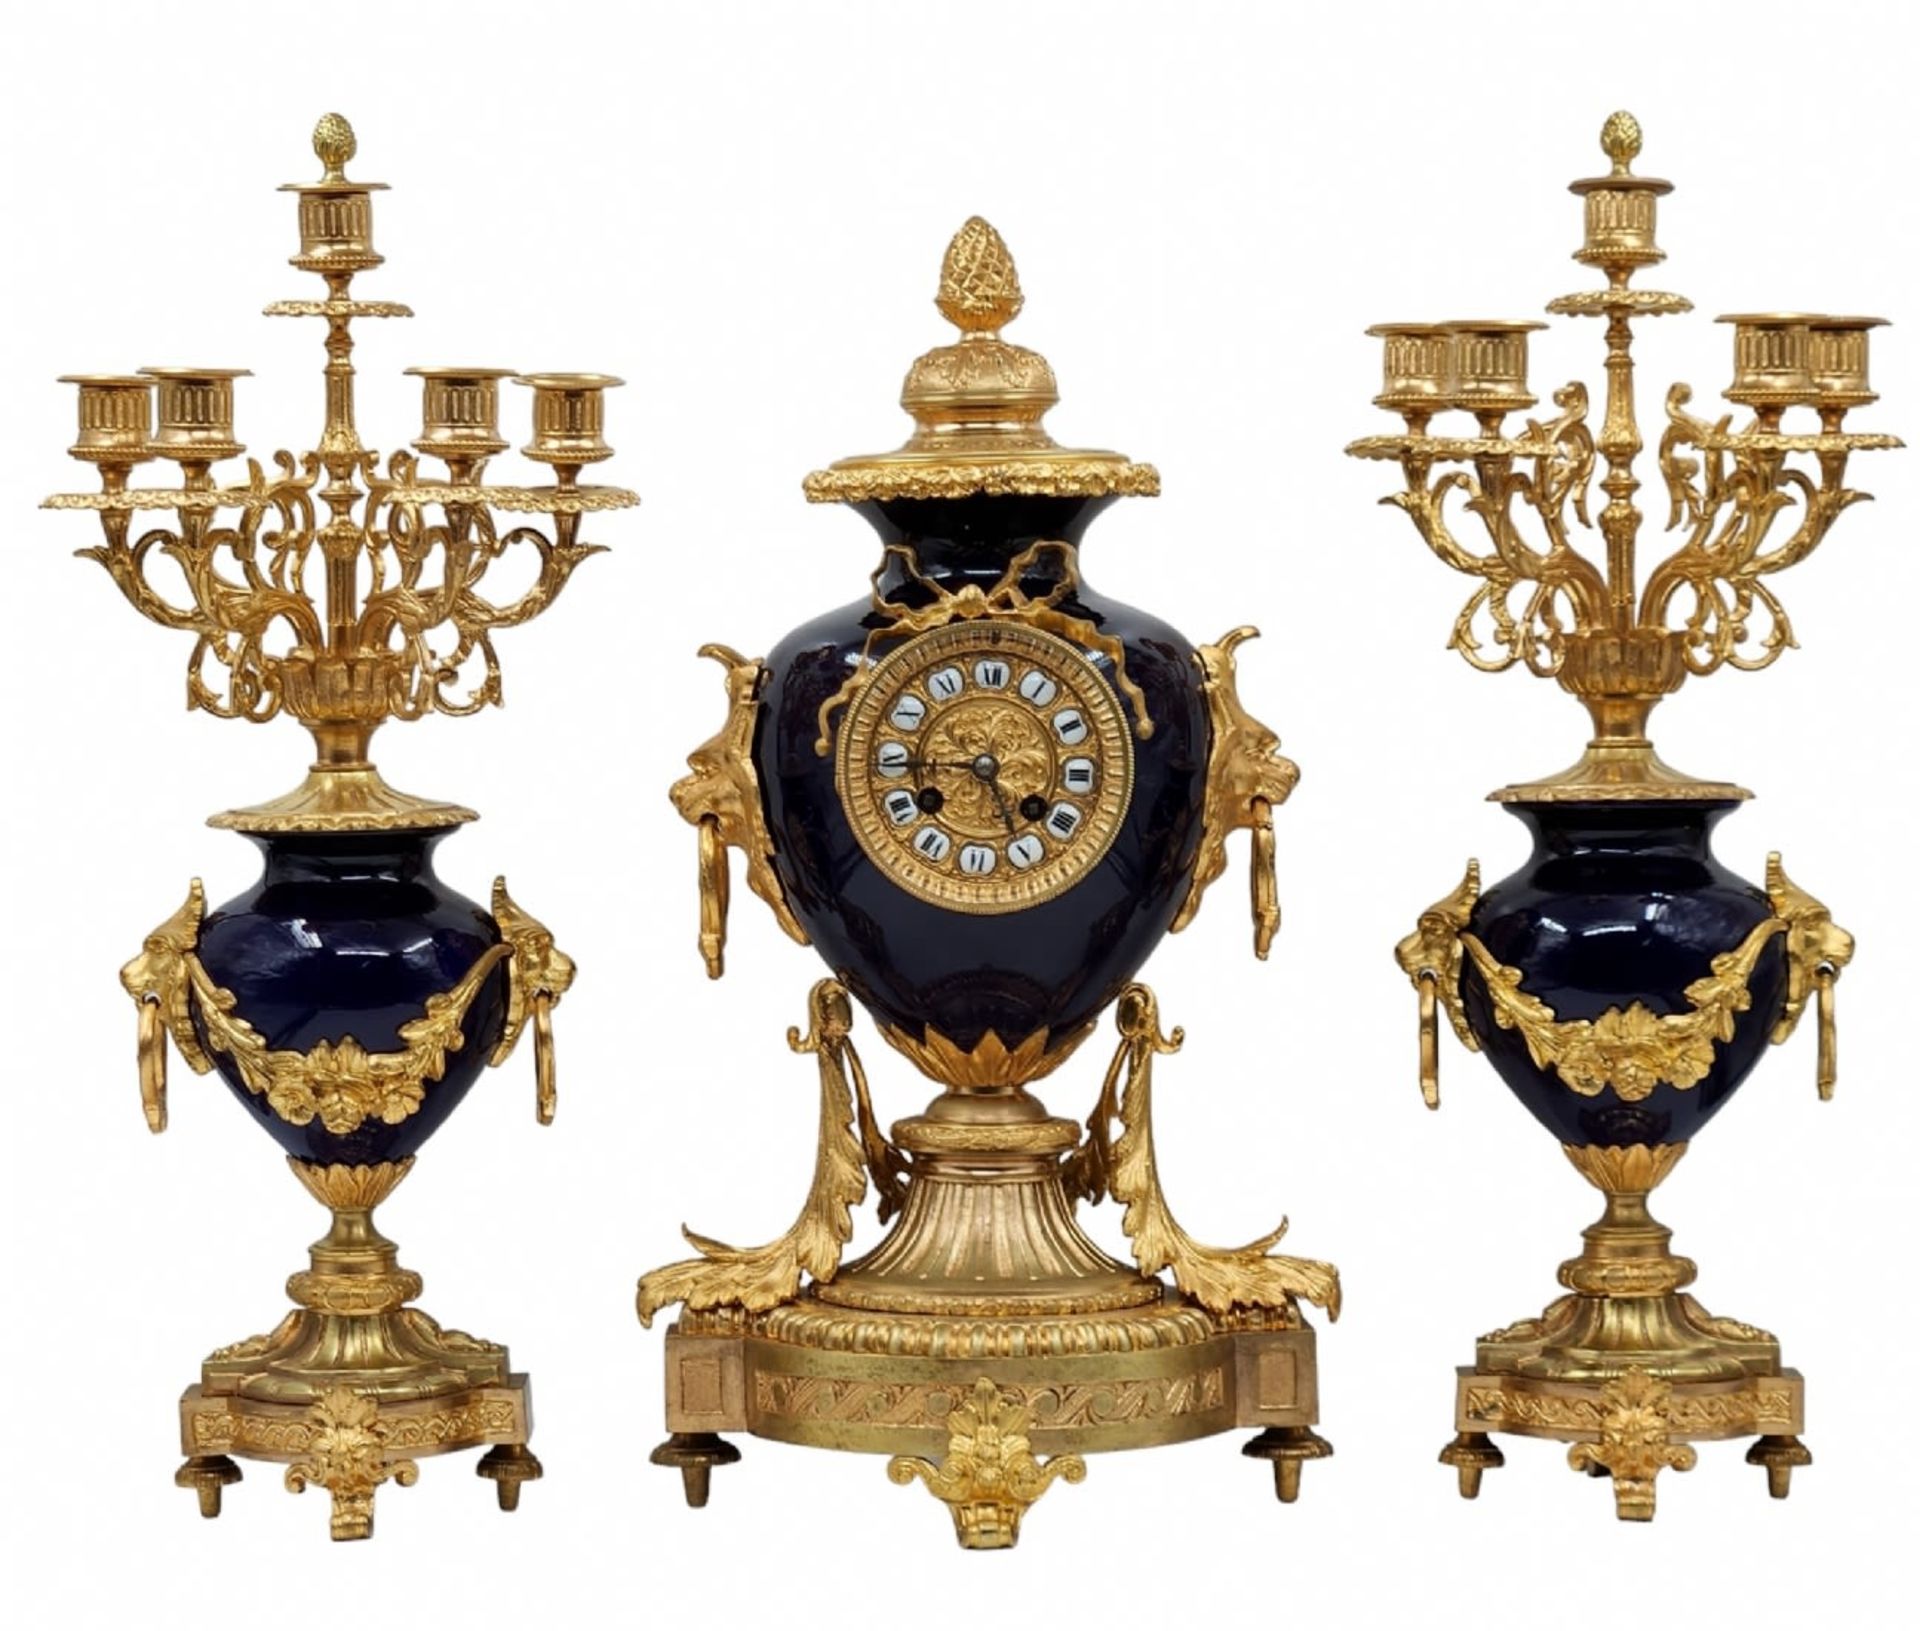 French Garniture set, from the 19th century, louis XVI or Louis XV style, includes: a mantle clock